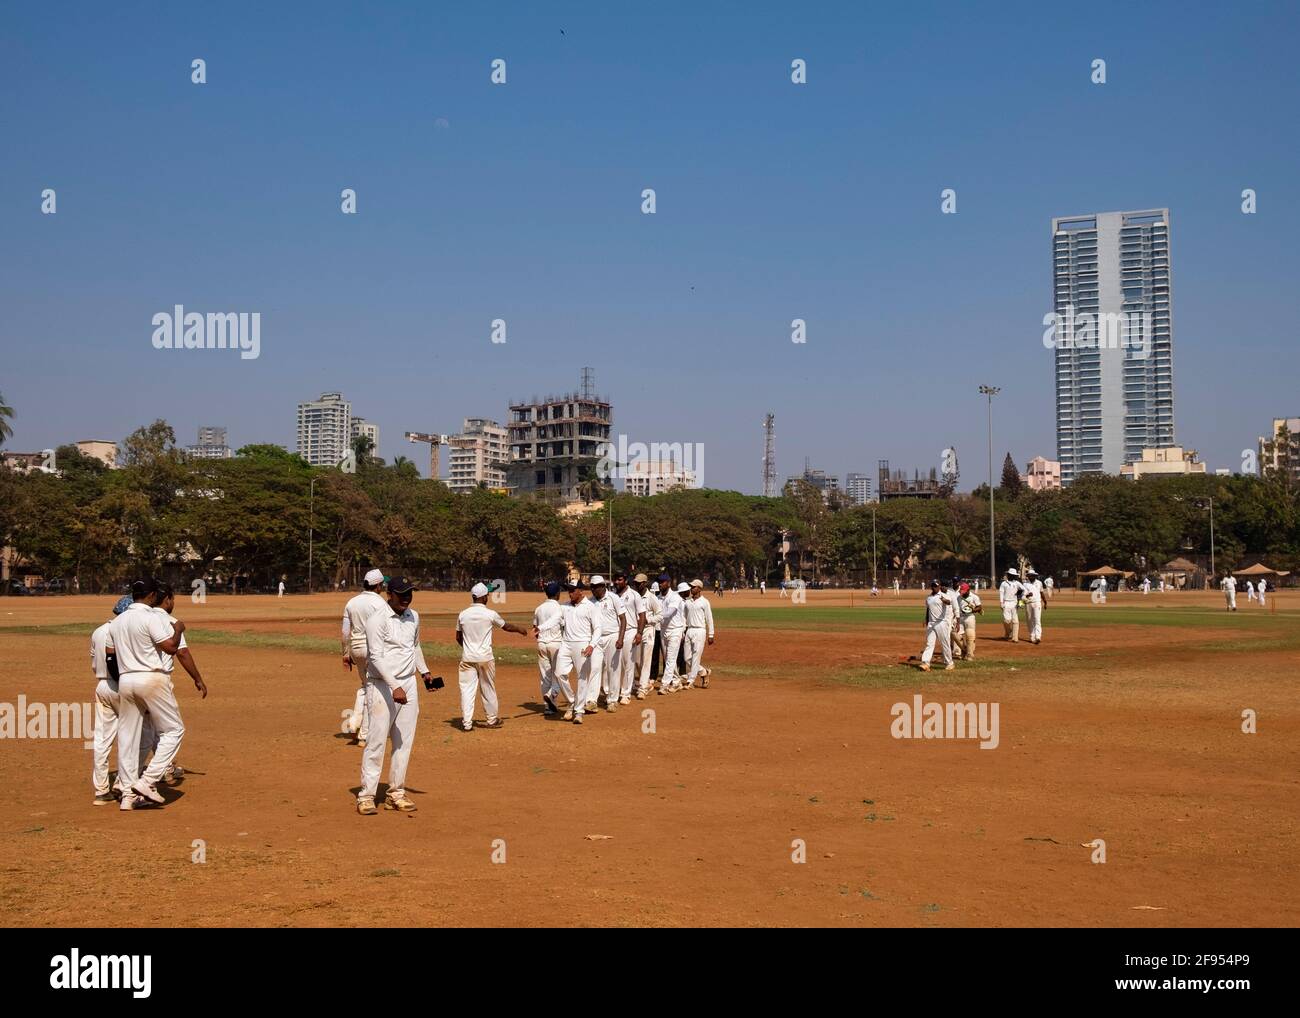 Two teams are shaking hands after the end of the cricket match in Shivaji Park in Mumbai-Dadar, India Stock Photo